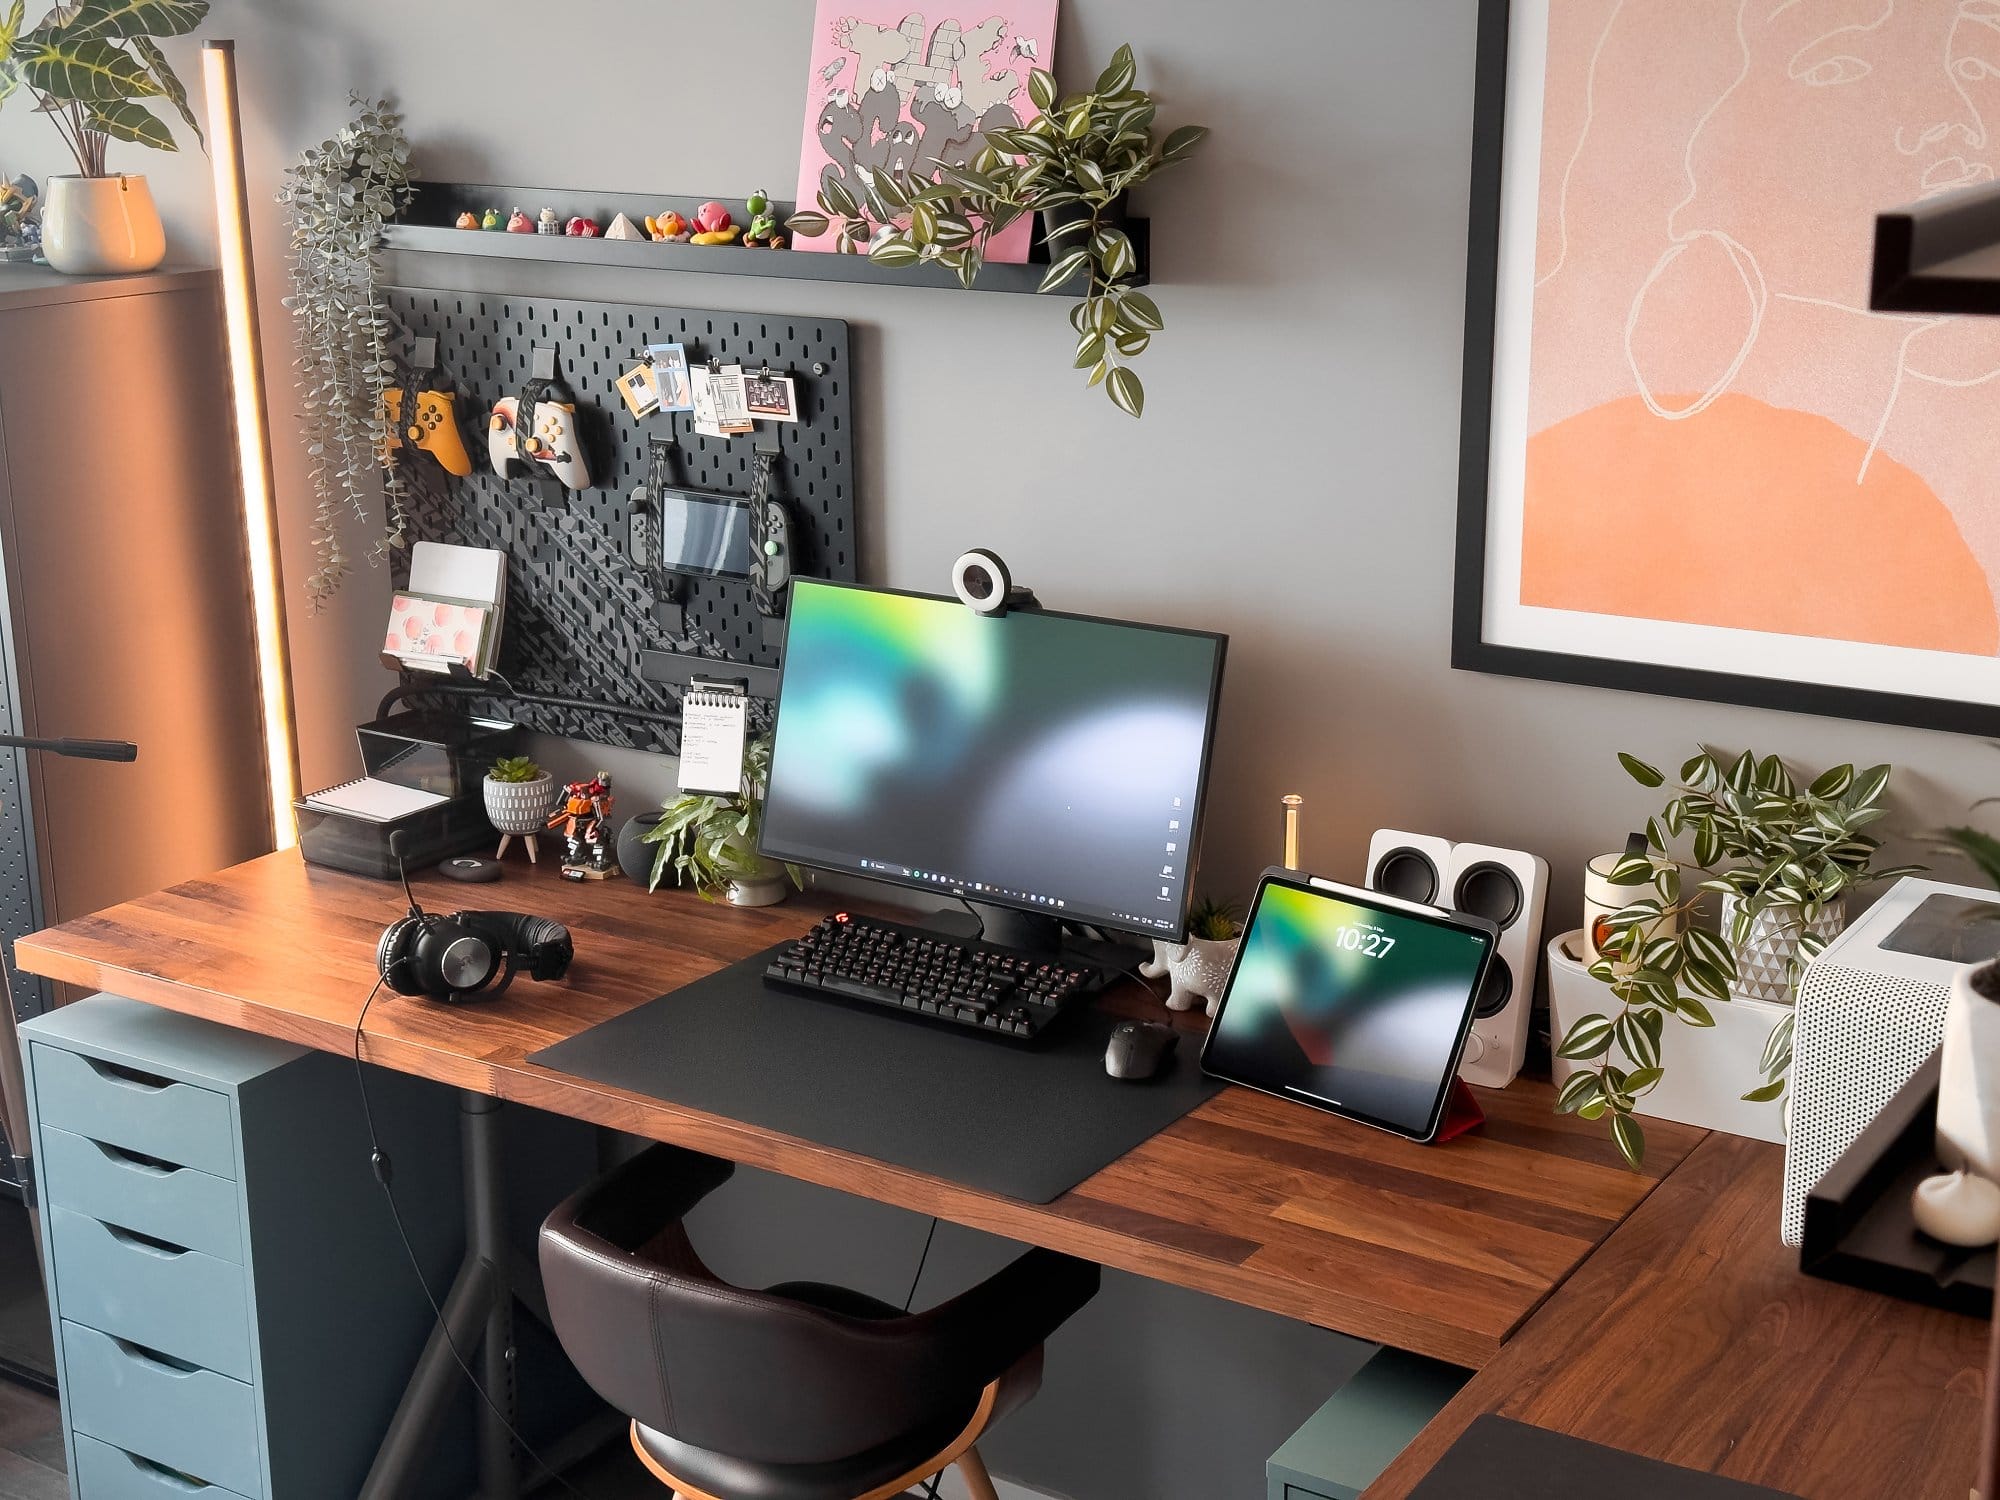 An organised and modern workspace featuring a Dell monitor with Razer Kiyo webcam, Logitech G Pro keyboard and mouse, an iPad Pro 12.9 (3rd Gen), Logitech G Pro X headphones, and various plants and accessories on a wooden IKEA KARLBY desk